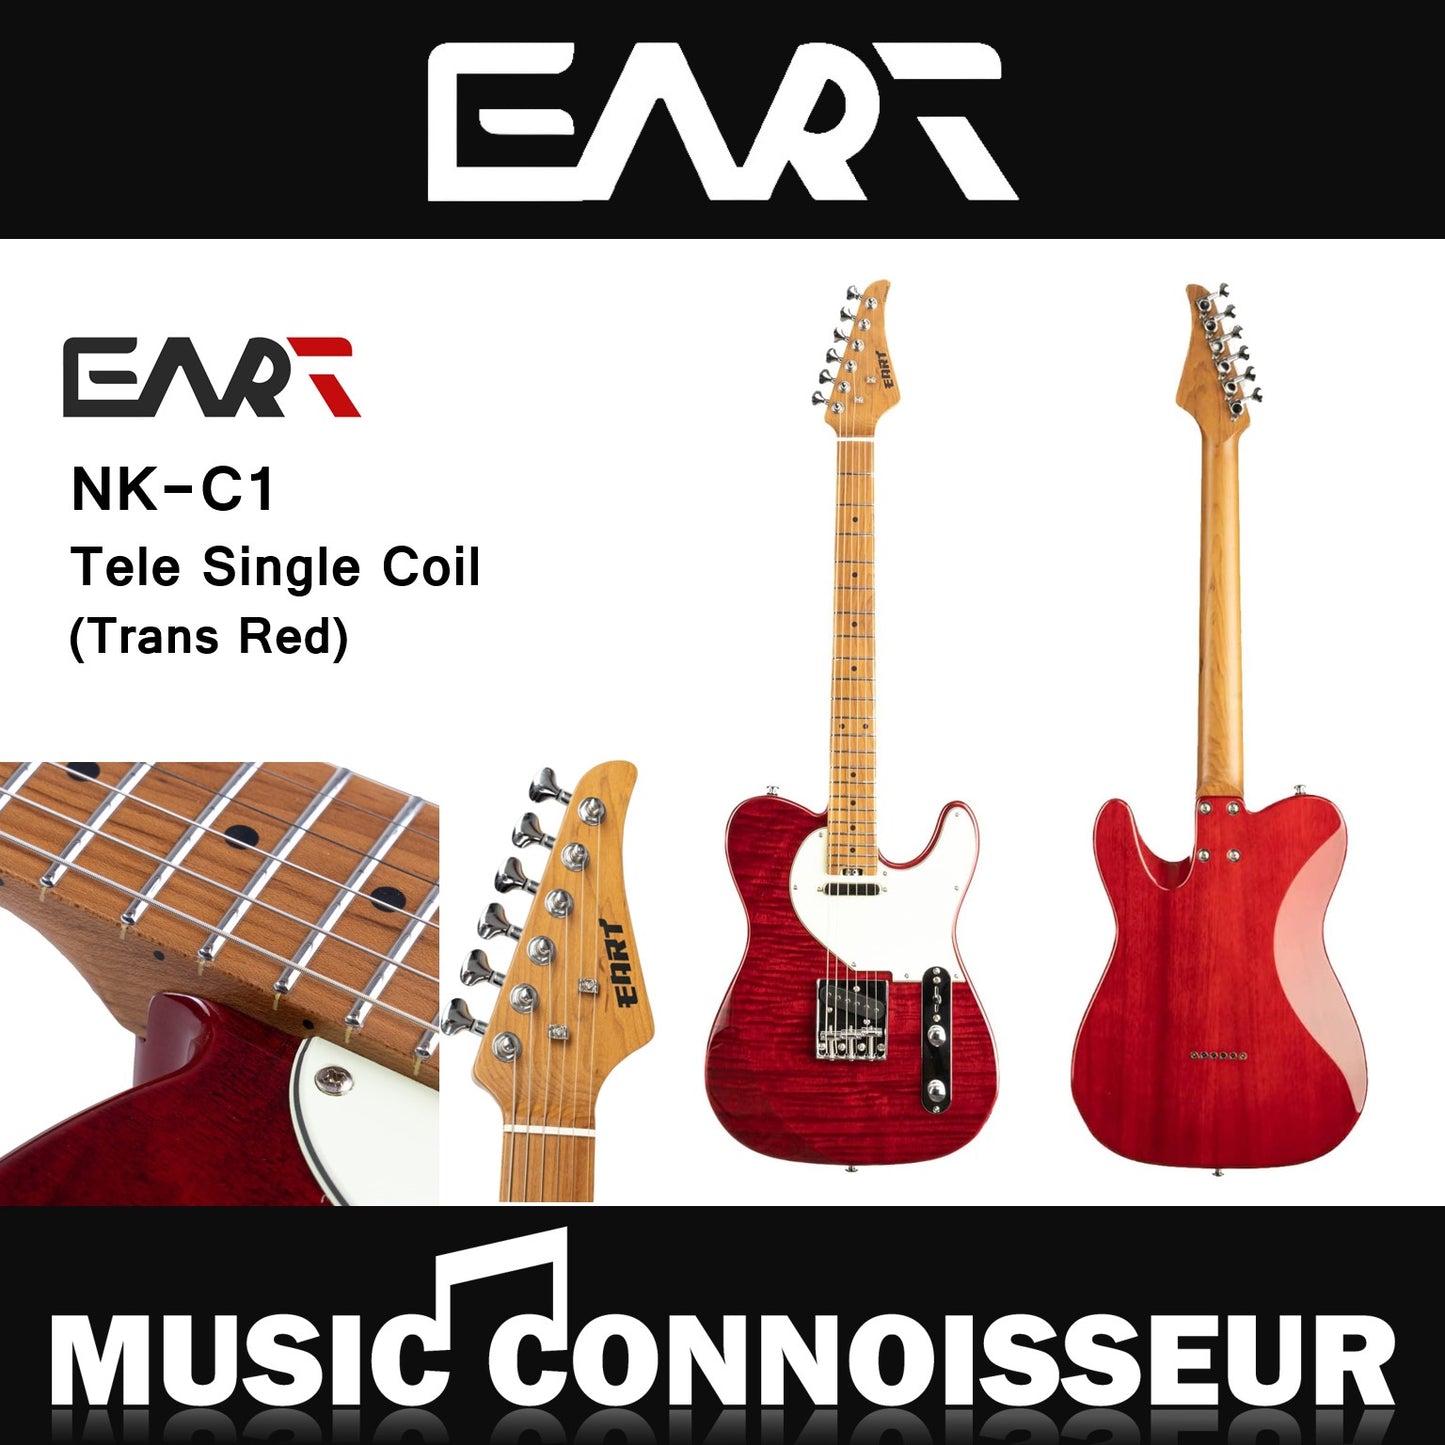 EART NK-C1 Tele Single Coil Electric Guitar (Trans Red)